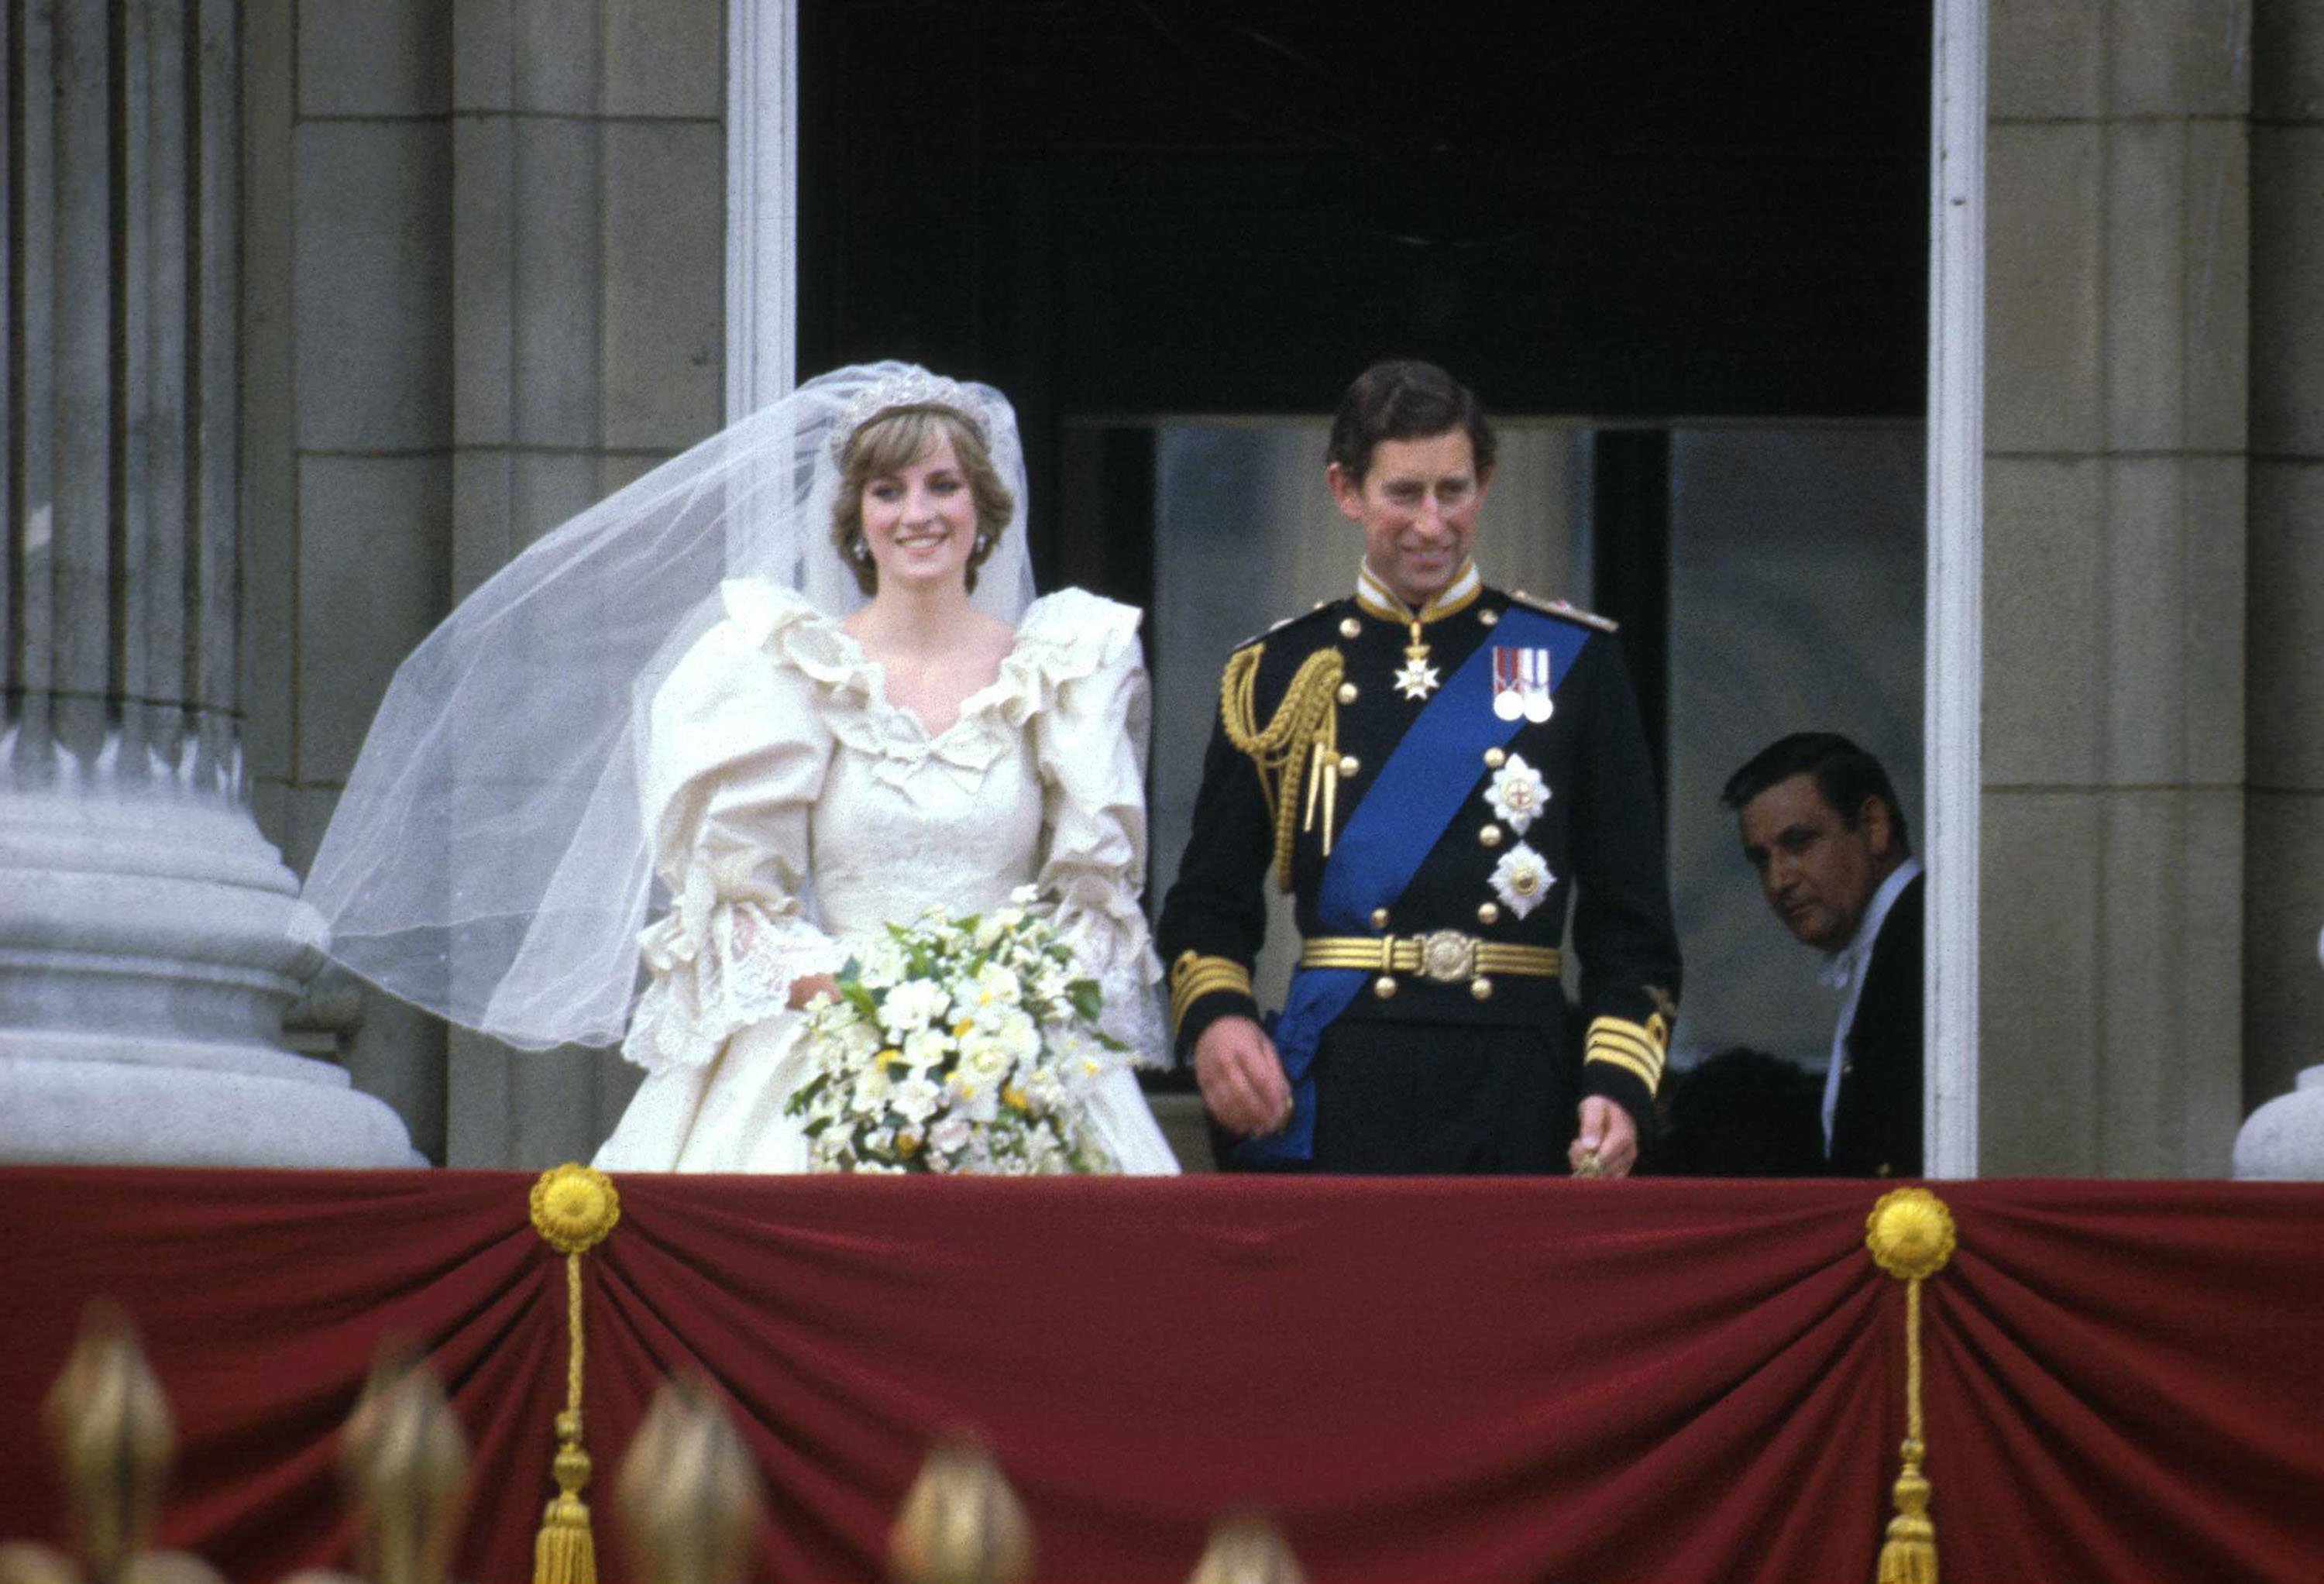 Prince Charles and his wife Princess Diana pictured standing on the balcony of Buckingham Palace after their wedding ceremony at St. Paul's Cathedral, London, England, July 29, 1981.┃Source: Getty Images